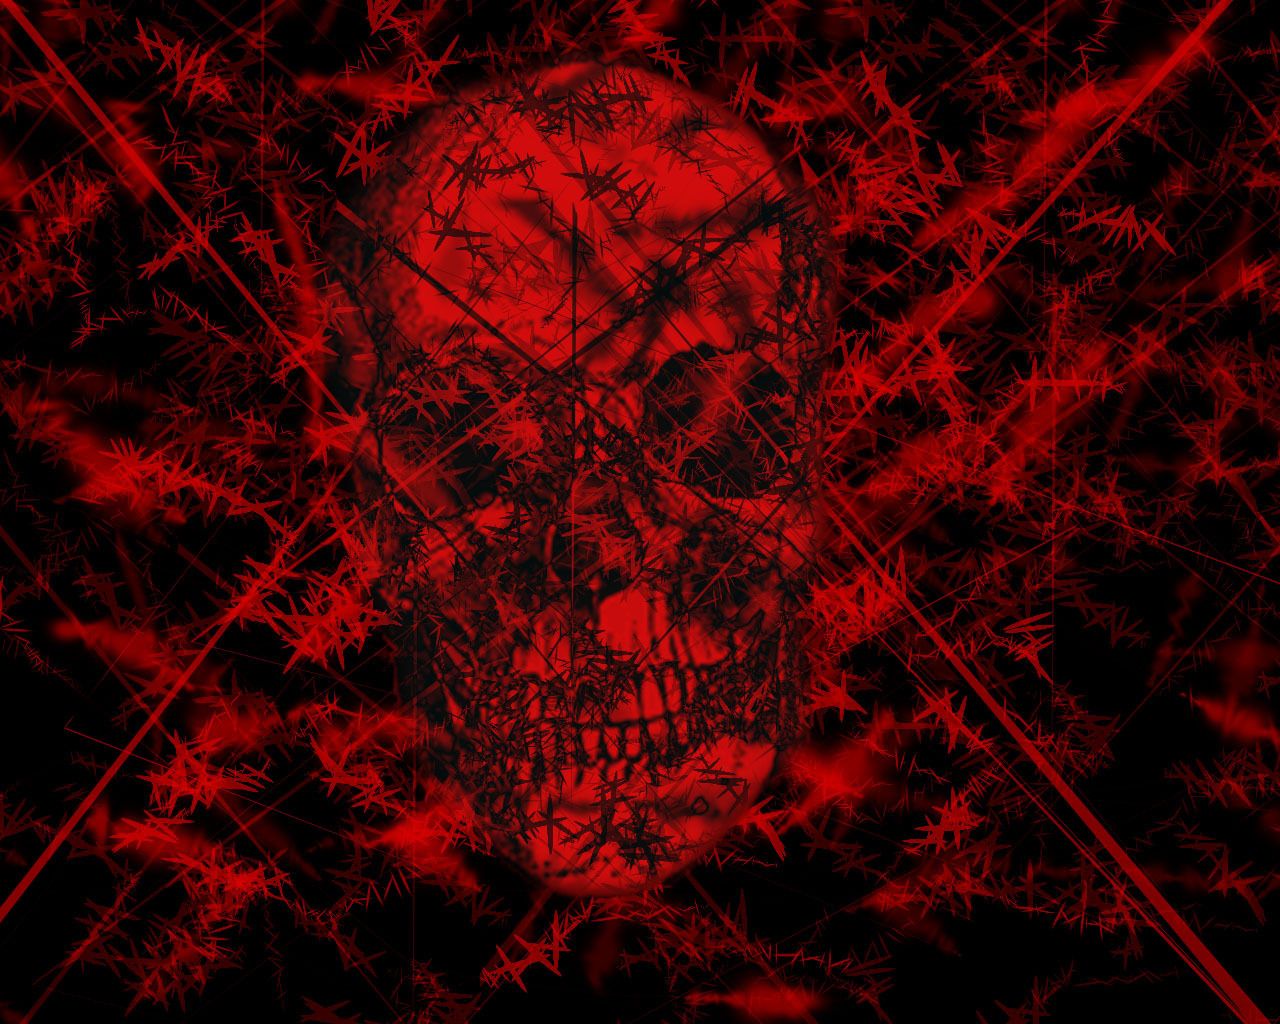 Gothic Wallpaper: gothic wallpaper. Gothic wallpaper, Red picture, Red image